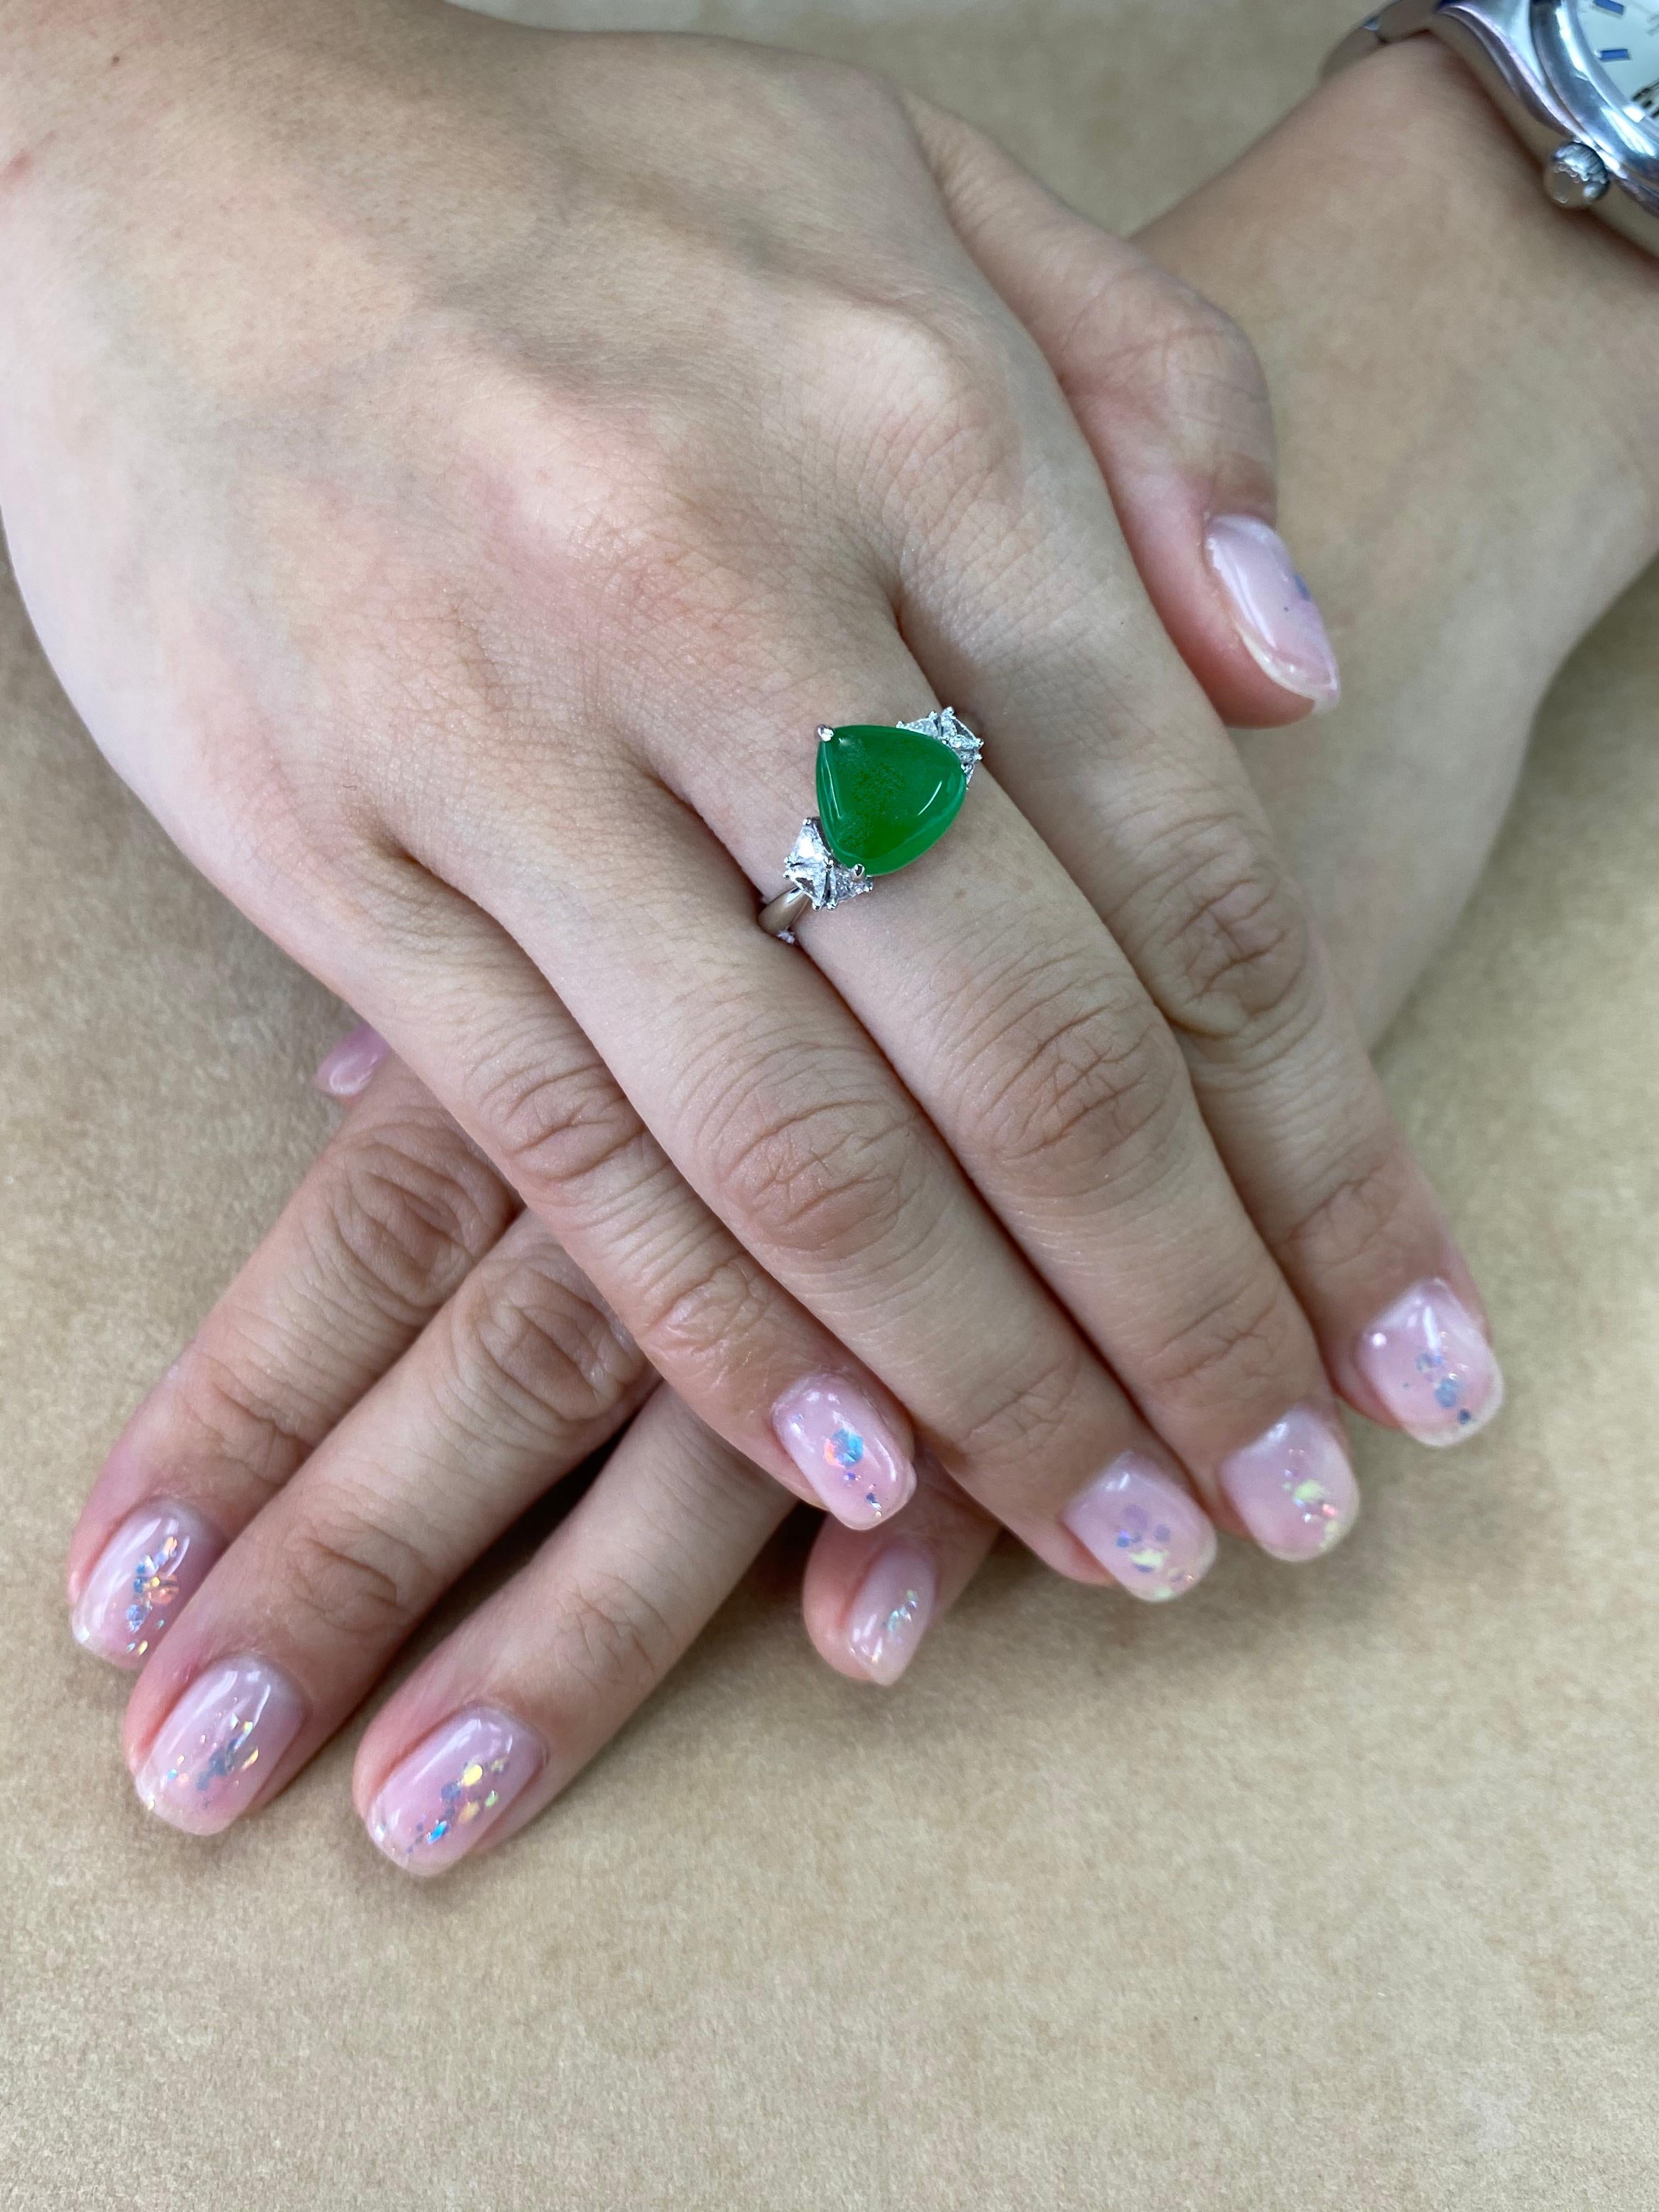 THIS JADE GLOWS! Here is an apple green Jade and diamond ring. It is certified by 2 labs as natural jadeite jade with no treatment or enhancement. The ring is set in 18k white gold and diamonds. There are 6 triangle shaped diamonds surrounding the